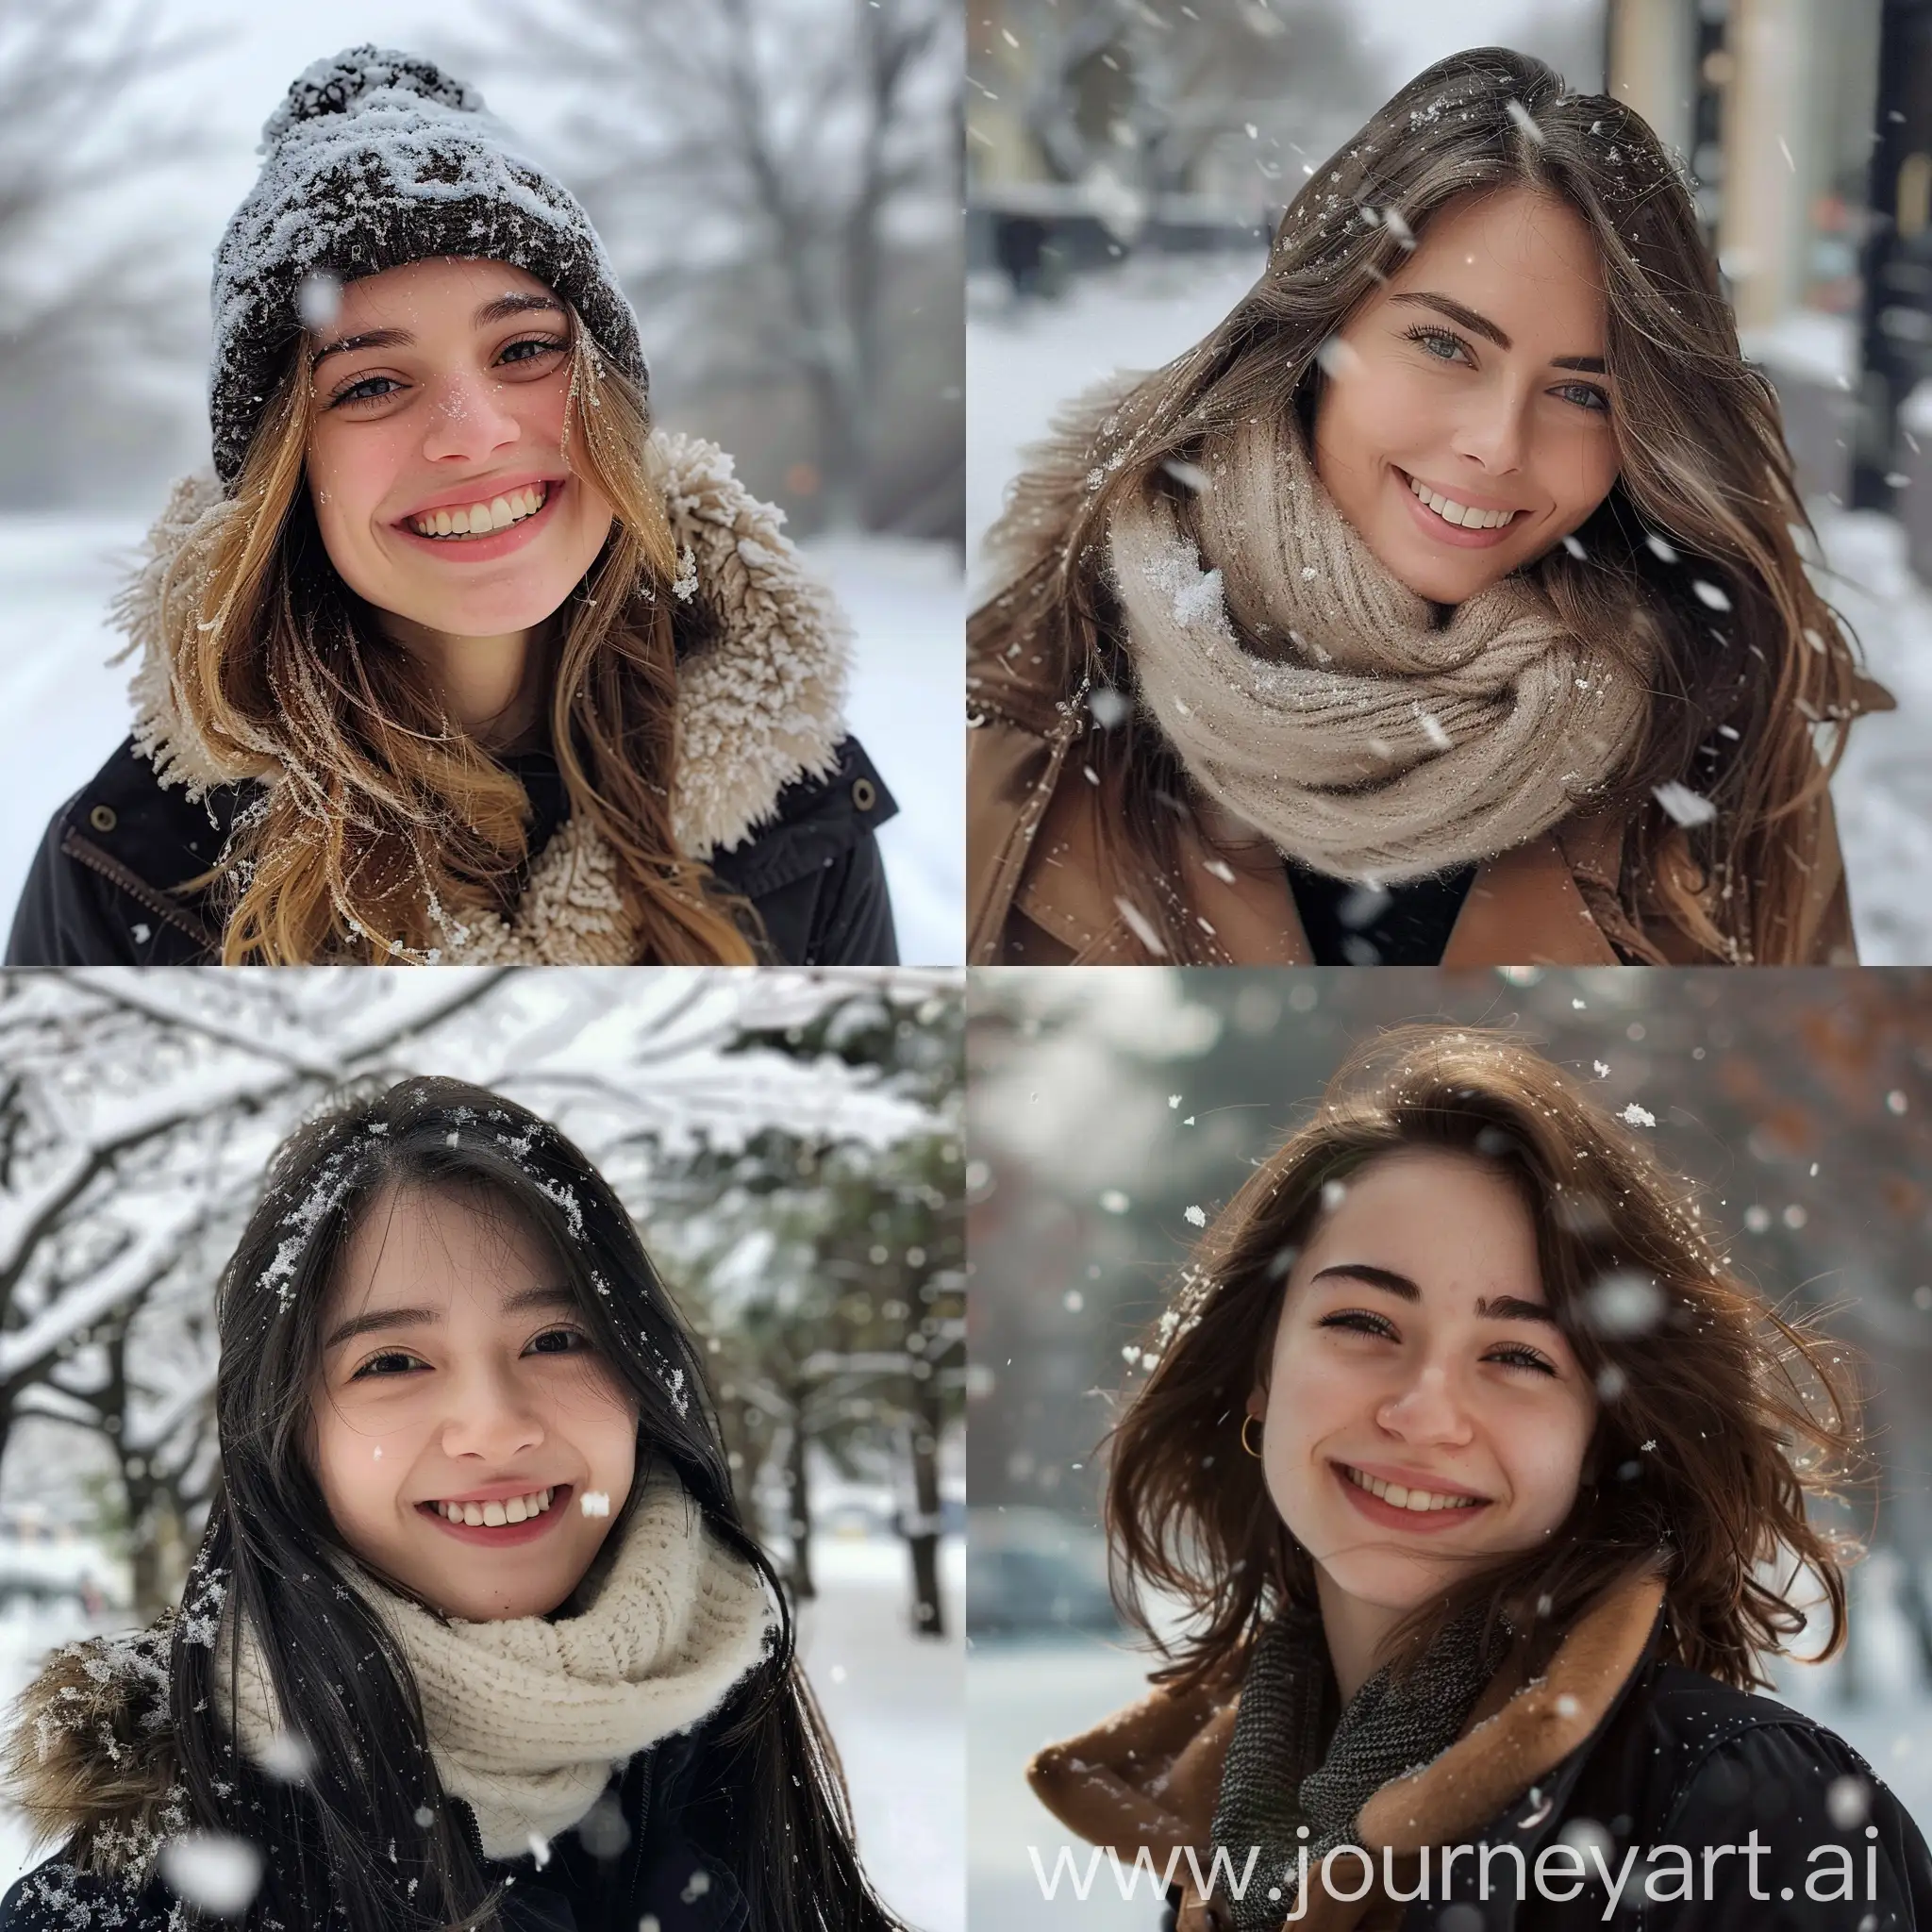 a real person, a beauty who is smiling,the weather is snowy